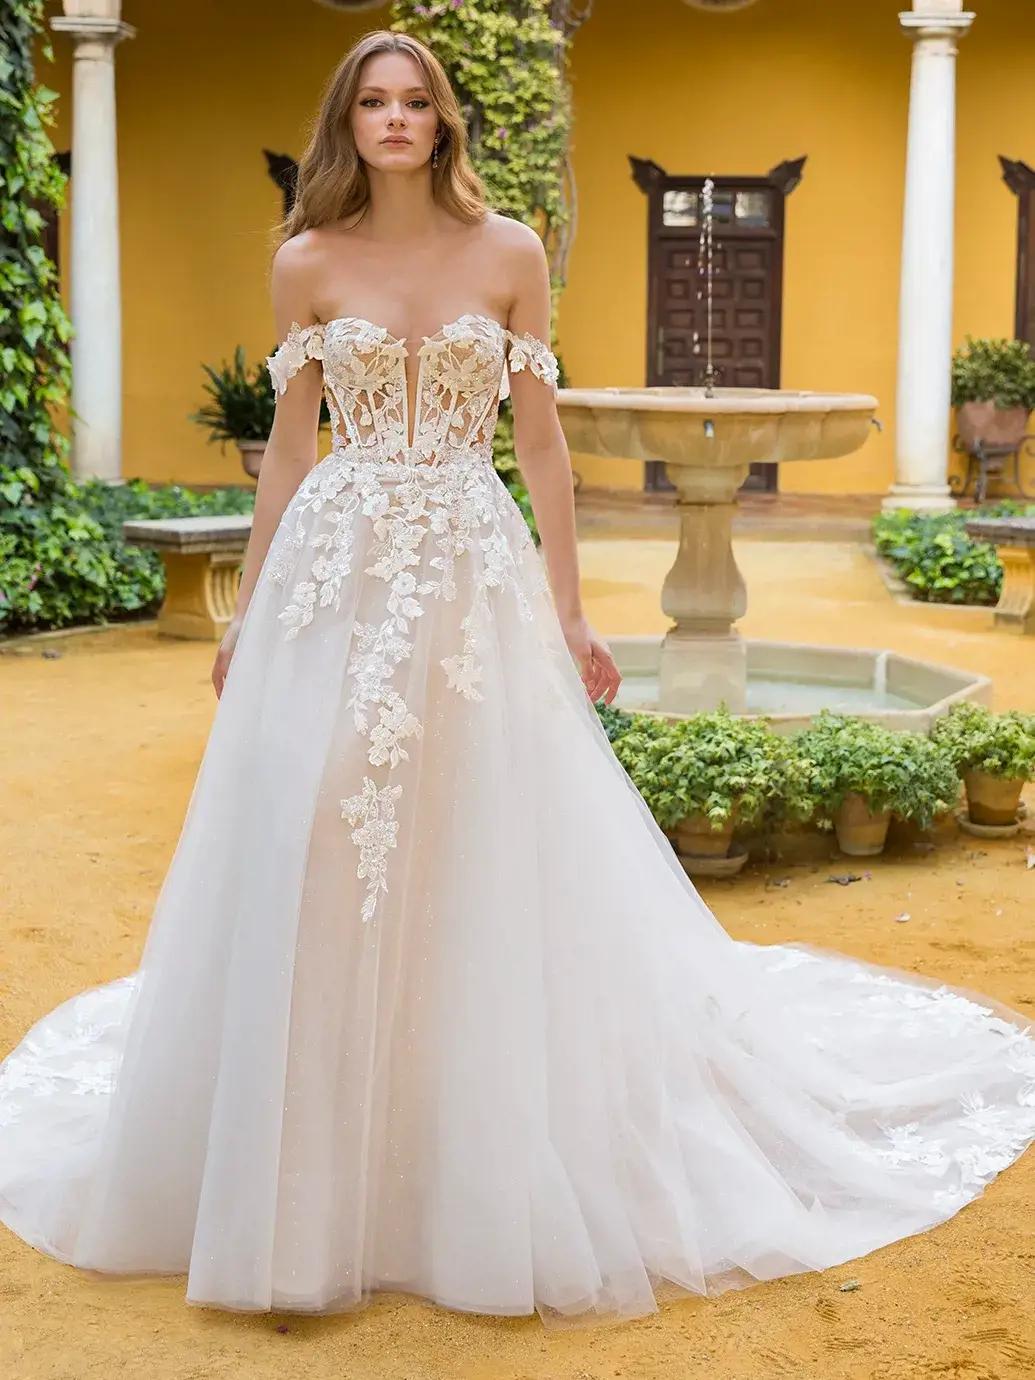 Lesley wedding gown by enzoani blue